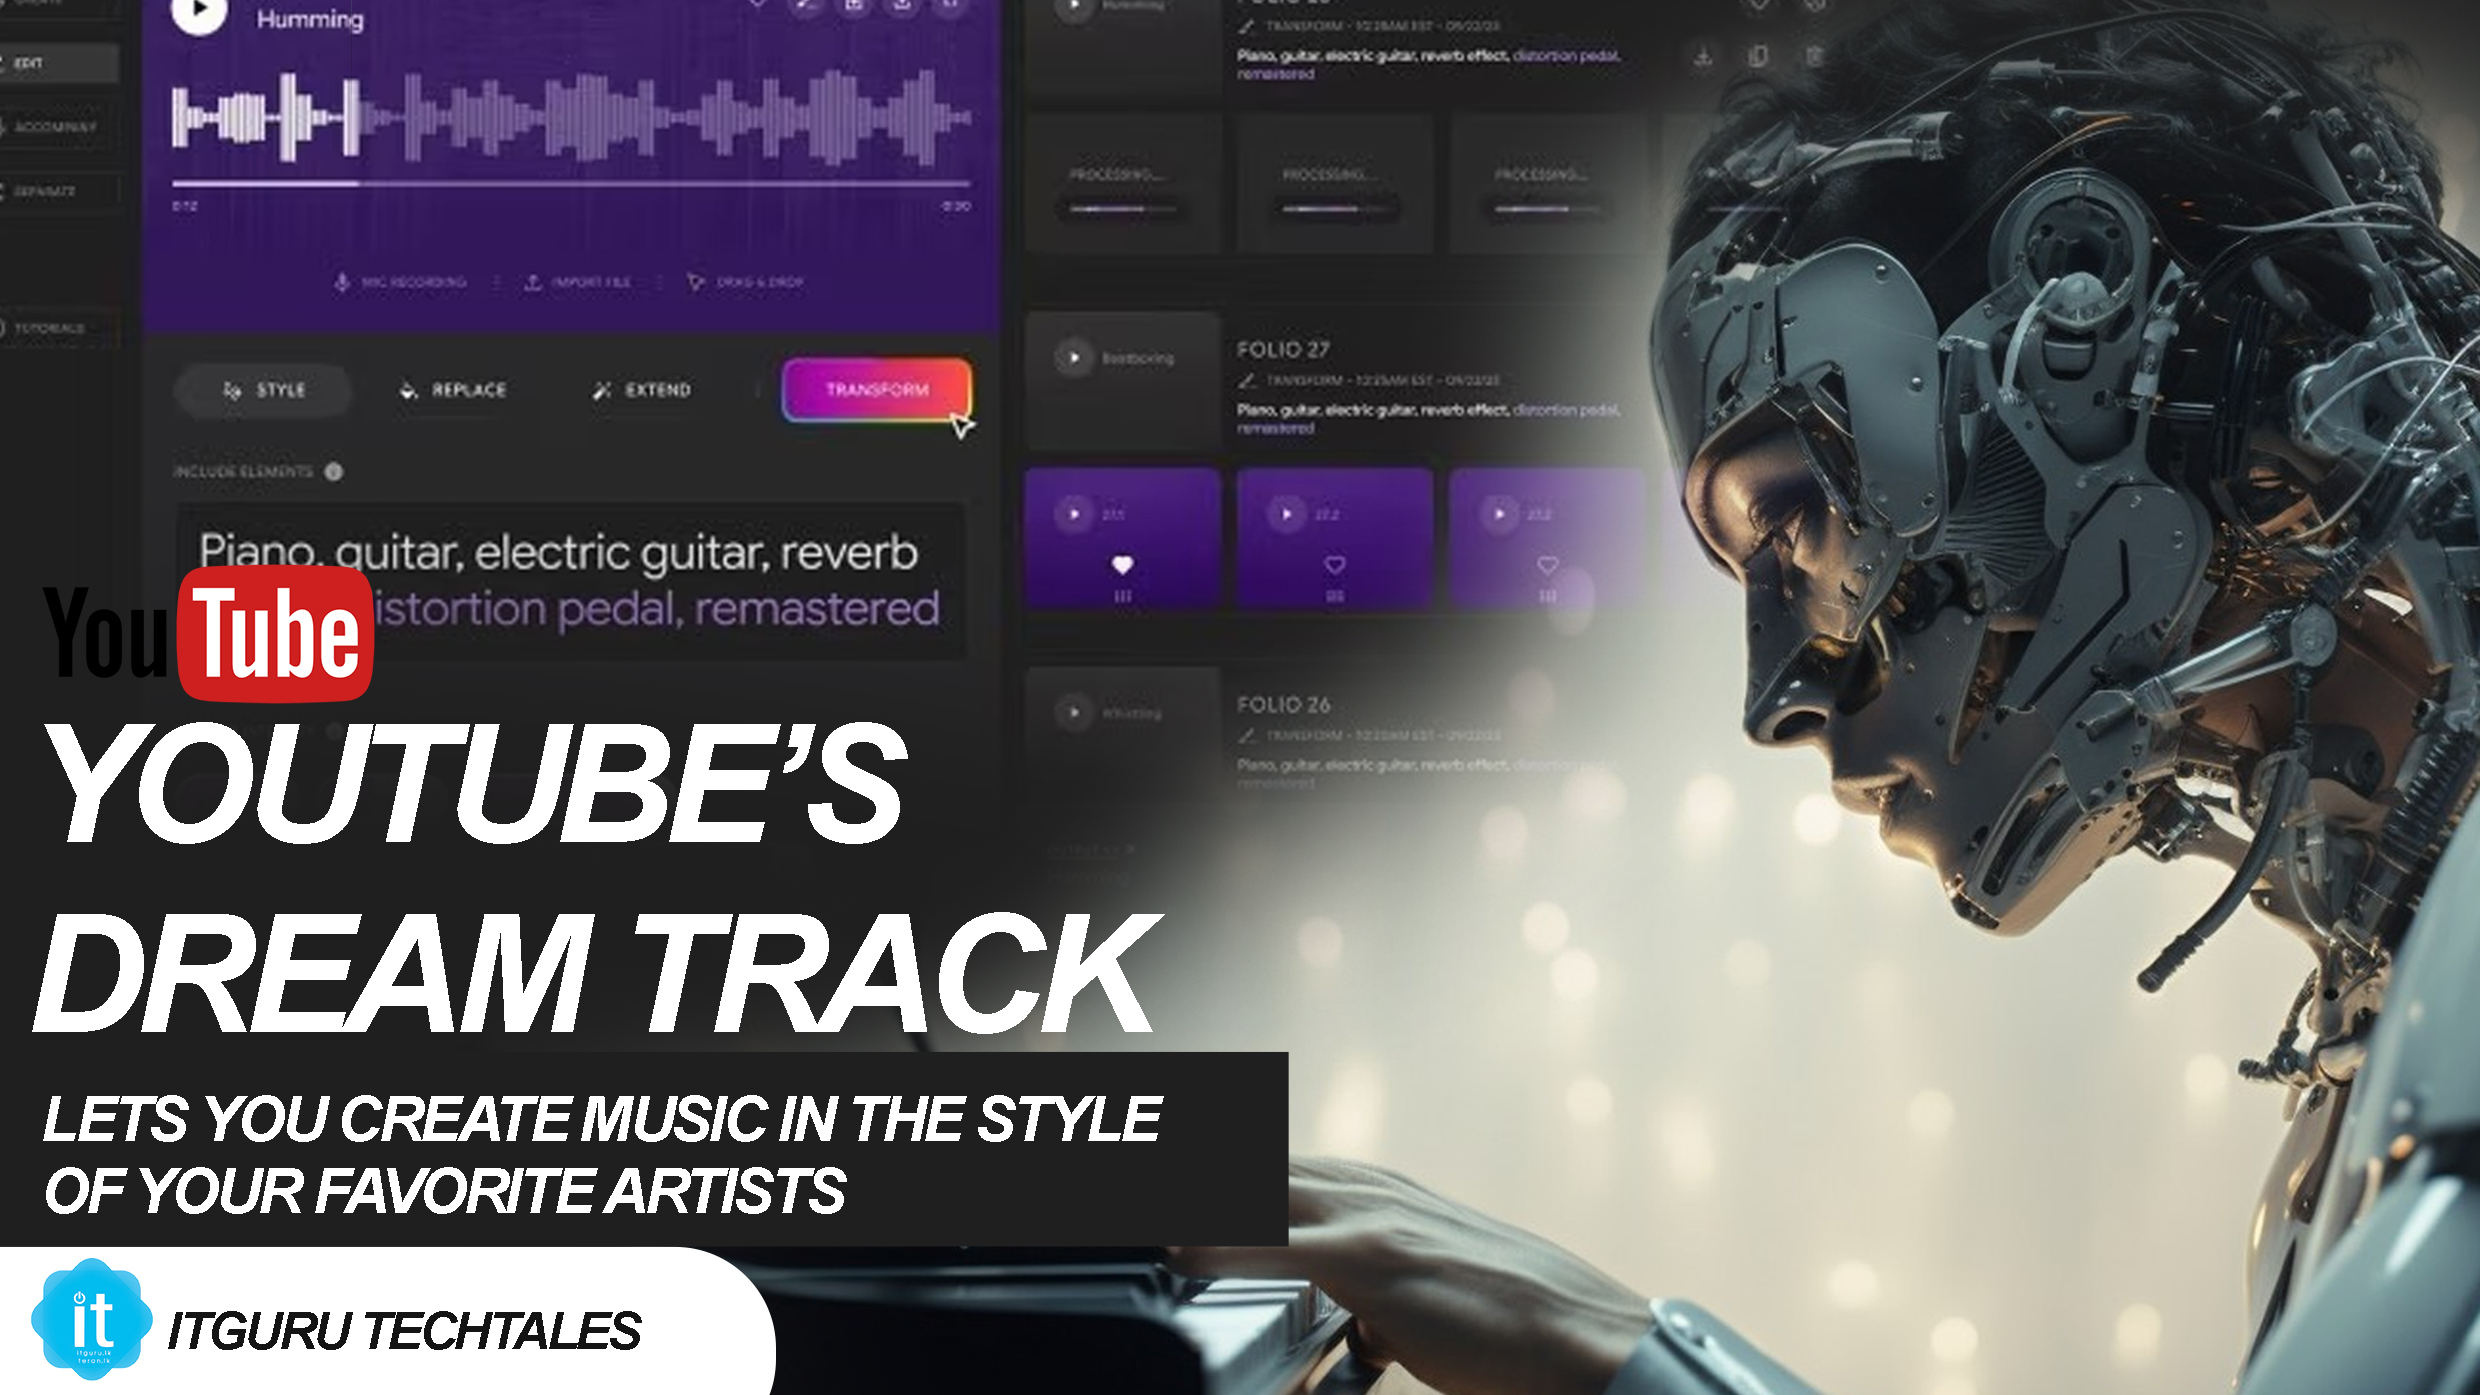 YouTube’s Dream Track lets you create music in the style of your favorite artists